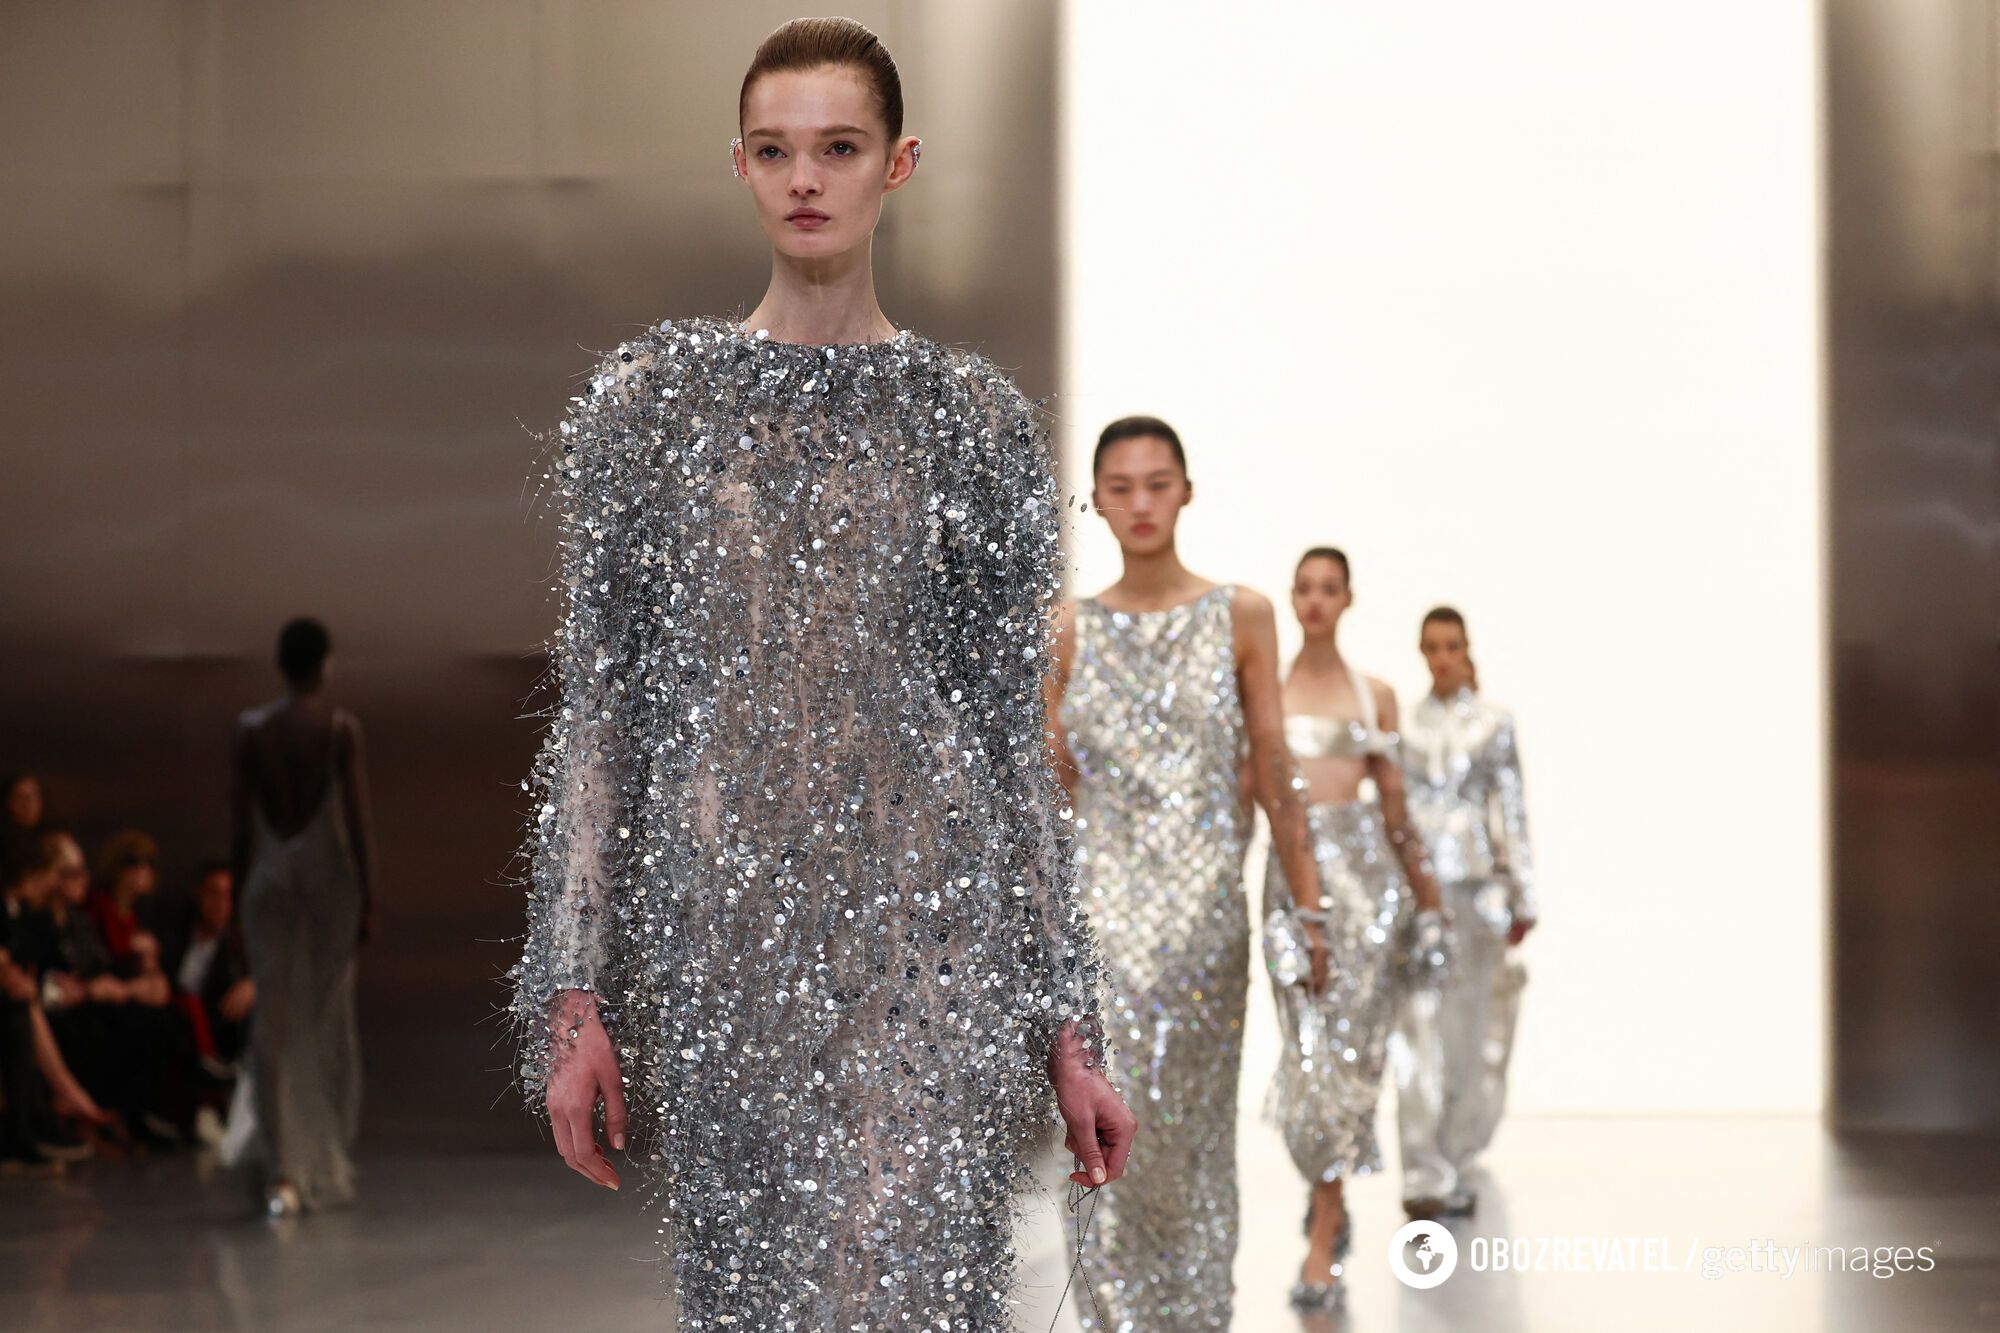 Robot children with microcircuits, bare breasts and marshmallow dresses: Andre Tan named the most striking looks at Paris Haute Couture Week